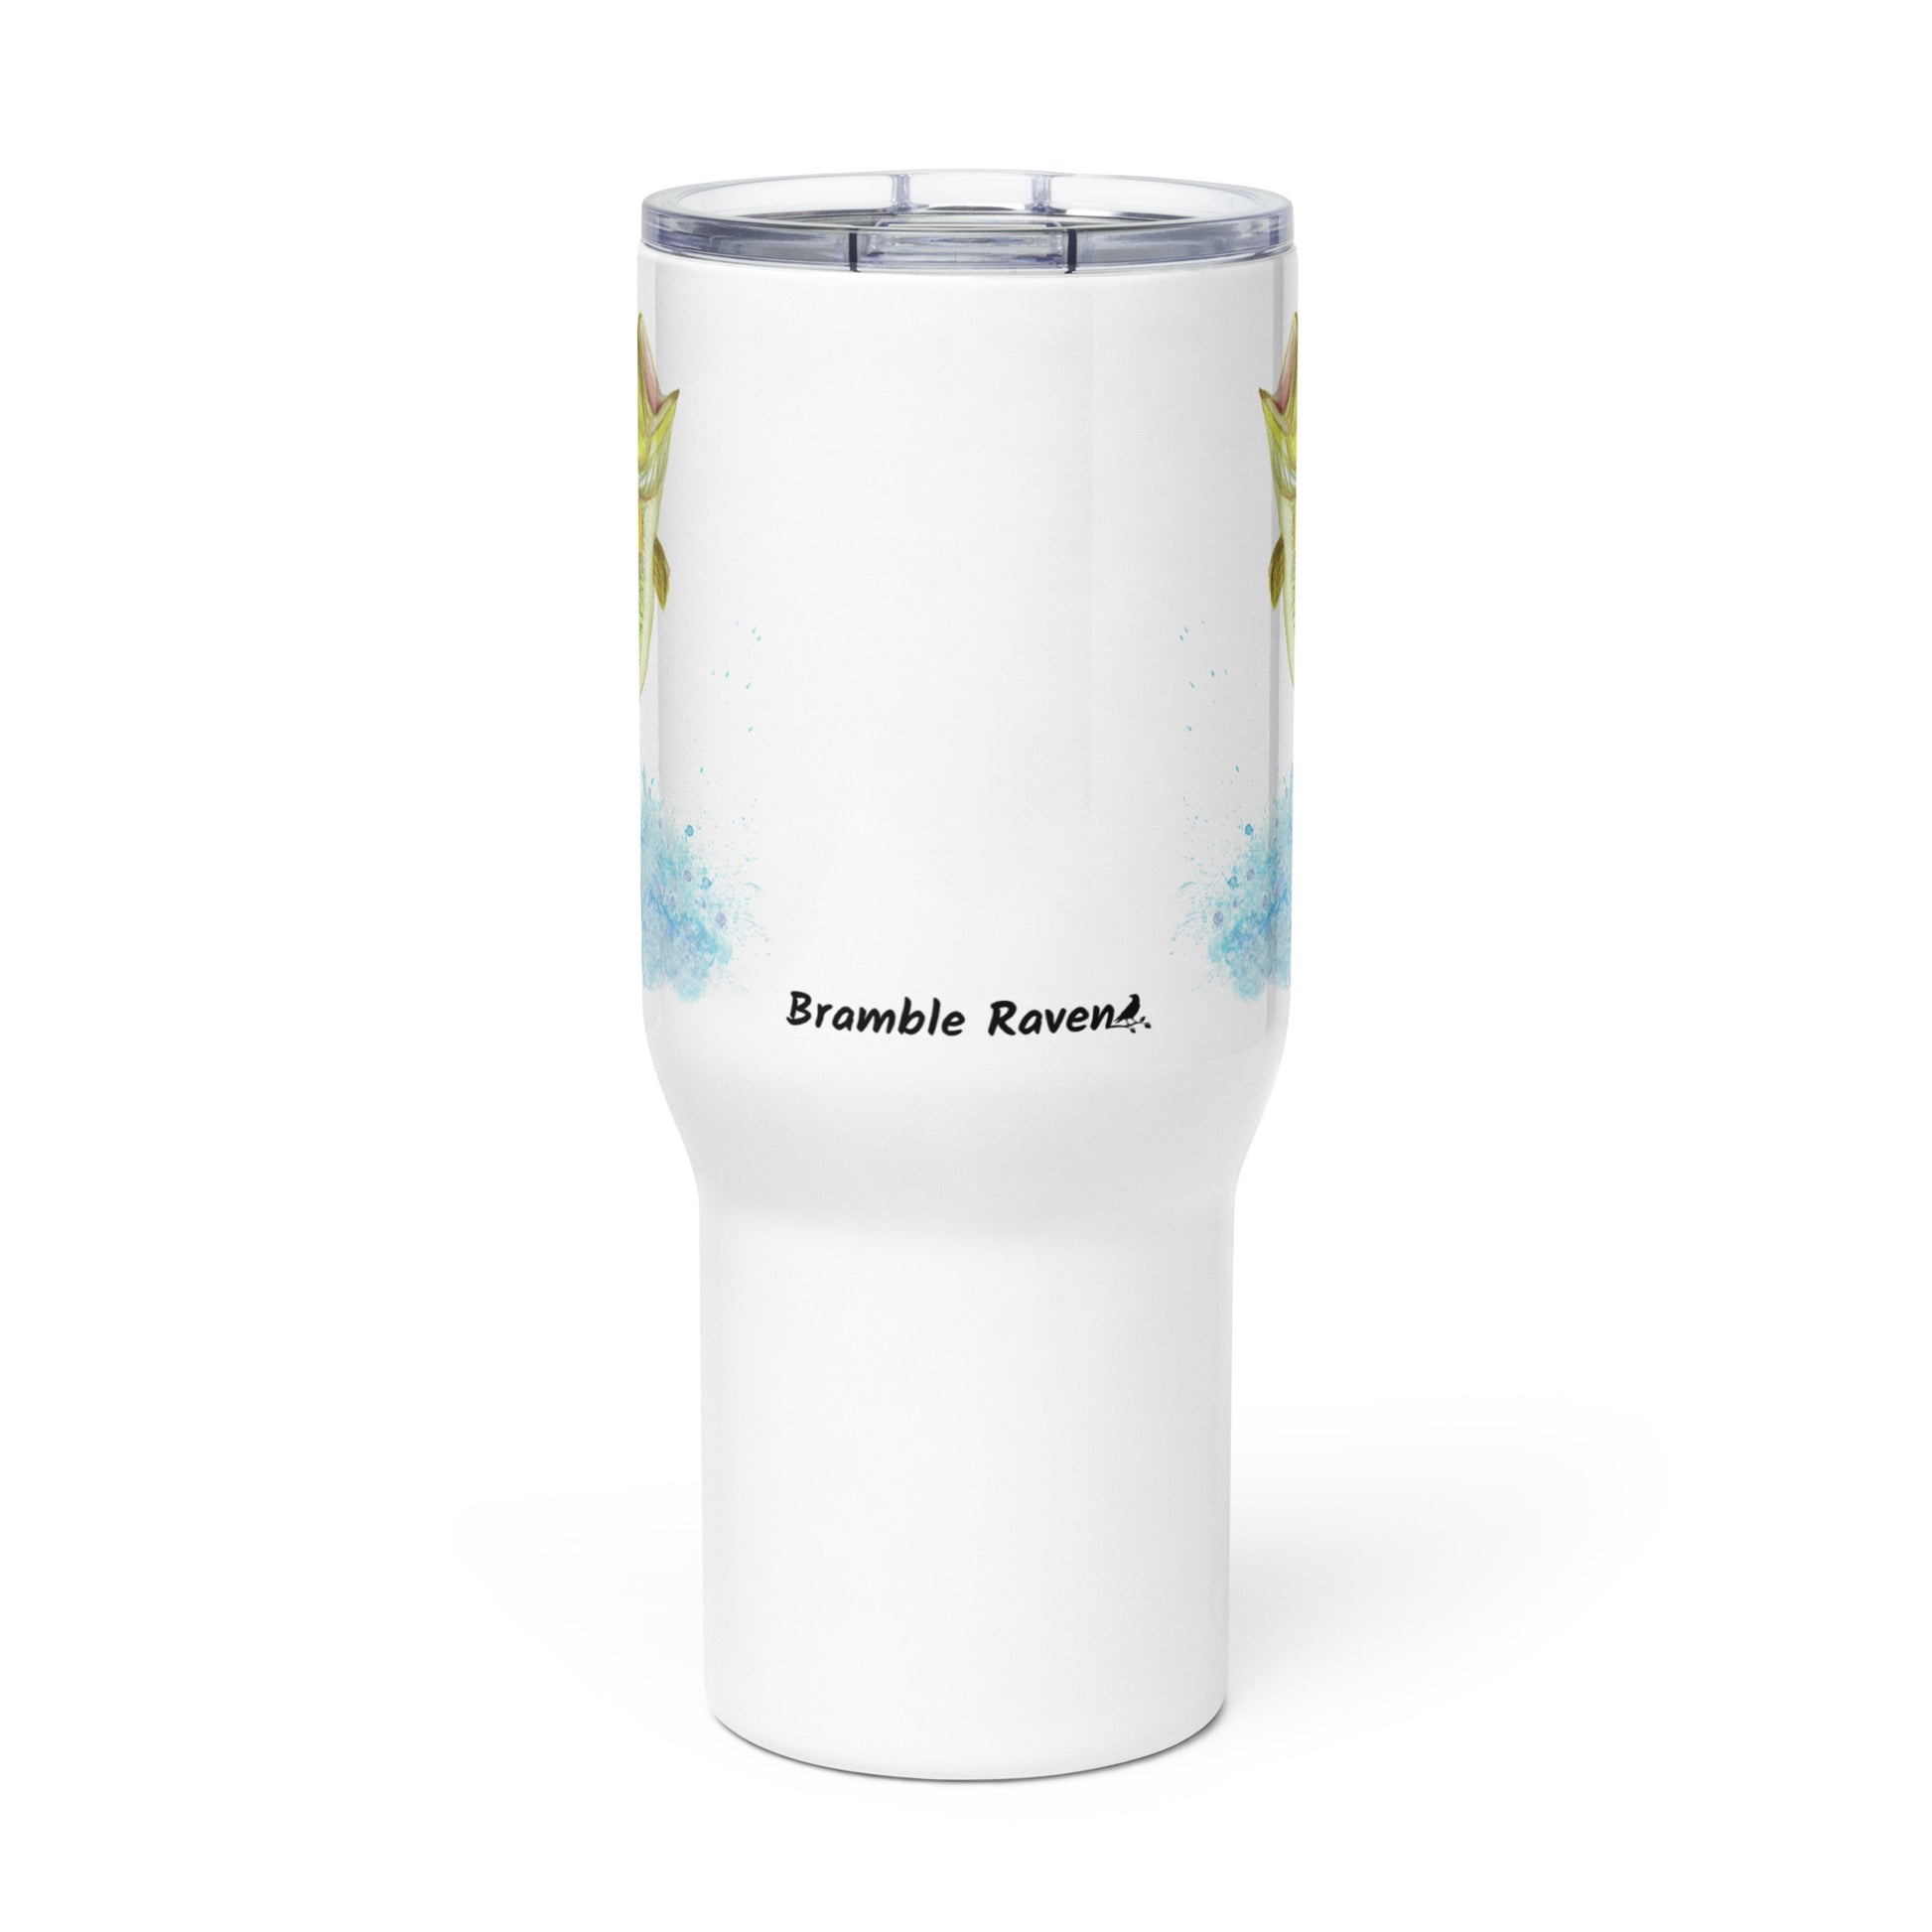 Stainless steel travel mug with handle. Holds 25 ounces of hot or cold drinks. Has print of watercolor bass fish on both sides. Fits most car cup holders. Comes with spill-proof BPA-free plastic lid. Front view of mug.